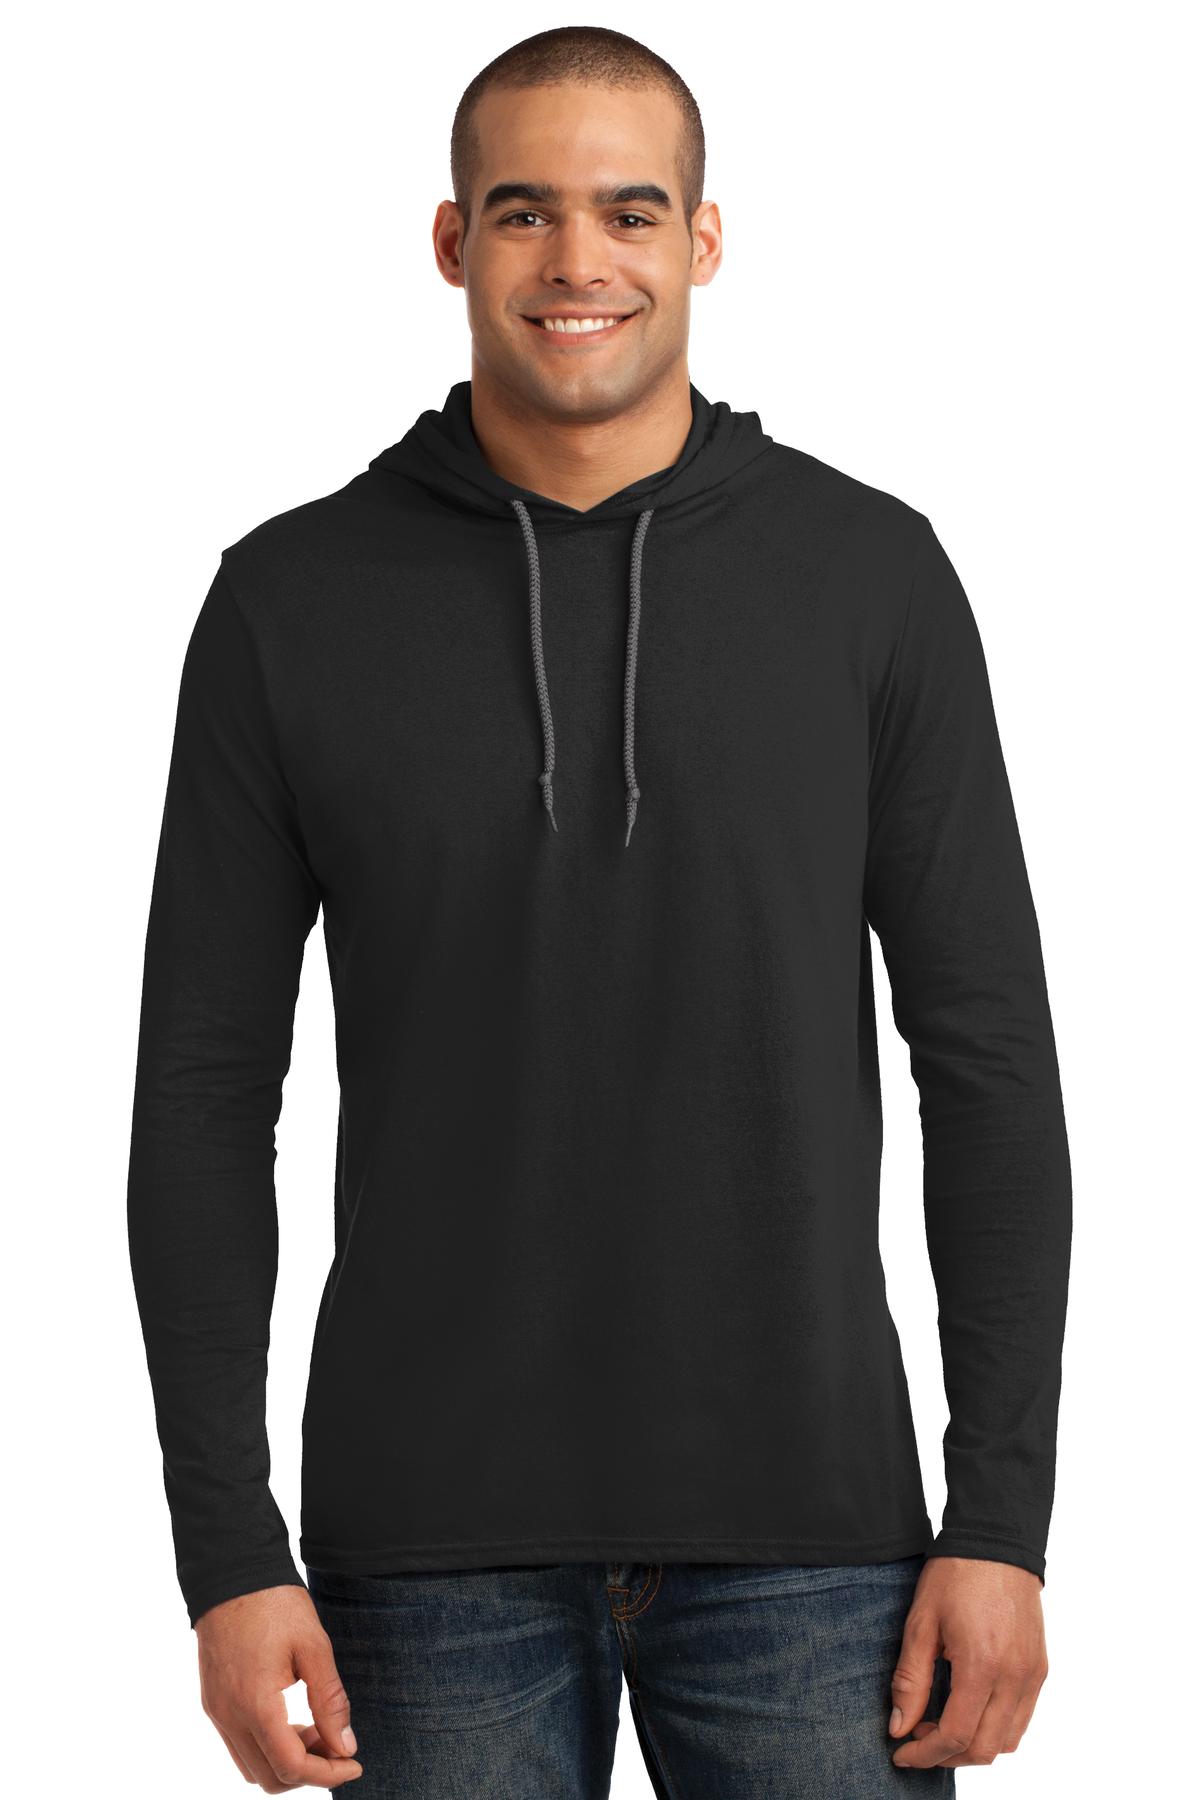 Luxe-T Men's Big Size 4X Black Heavy Weight Long Sleeve Hooded T-Shirt NWT